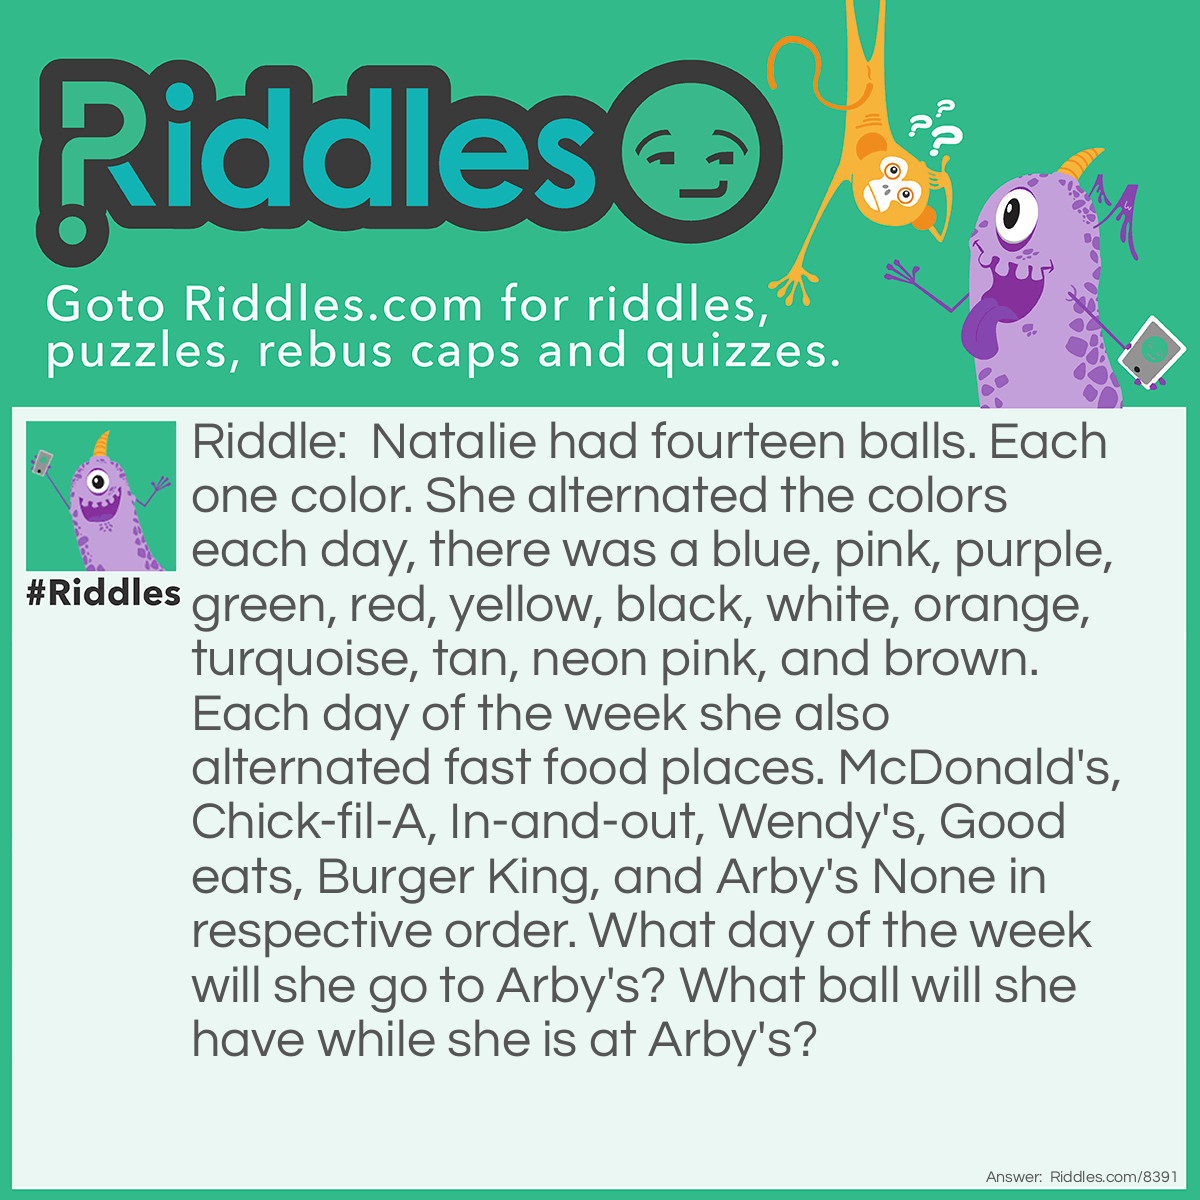 Riddle: Natalie had fourteen balls. Each one color. She alternated the colors each day, there was a blue, pink, purple, green, red, yellow, black, white, orange, turquoise, tan, neon pink, and brown. Each day of the week she also alternated fast food places. McDonald's, Chick-fil-A, In-and-out, Wendy's, Good eats, Burger King, and Arby's None in respective order. What day of the week will she go to Arby's? What ball will she have while she is at Arby's? Answer: She will go to Arby's on Monday, for that is the first day of the week and A is the first letter of the alphabet. So on Tuesday she would go to Burger King. On Wednesday she would go to Chick-fil-A. And so on. She would have a Red Ball On Monday, because red is the first color of the rainbow. So on Tuesday she would have a Orange ball. And so on.